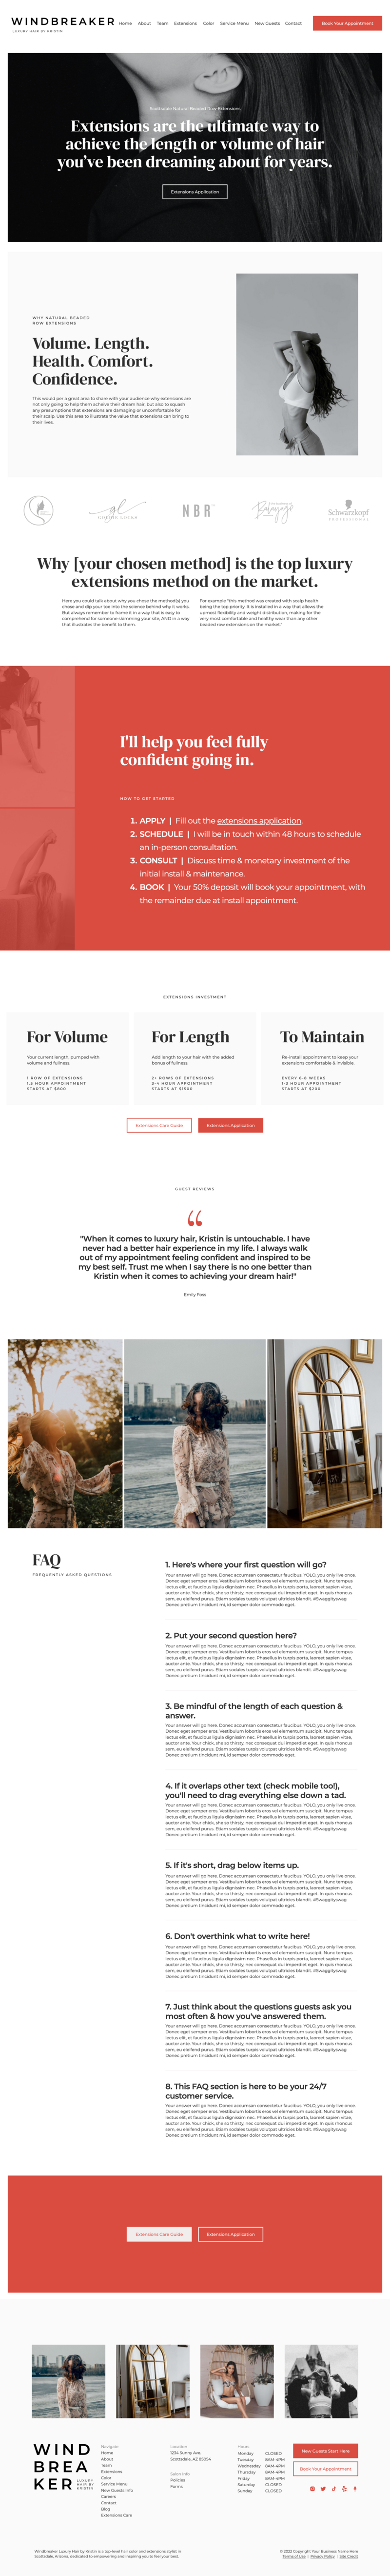 website-template-for-hair-stylists-salons-windbreaker-franklinandwillow-extensions-13_33_19